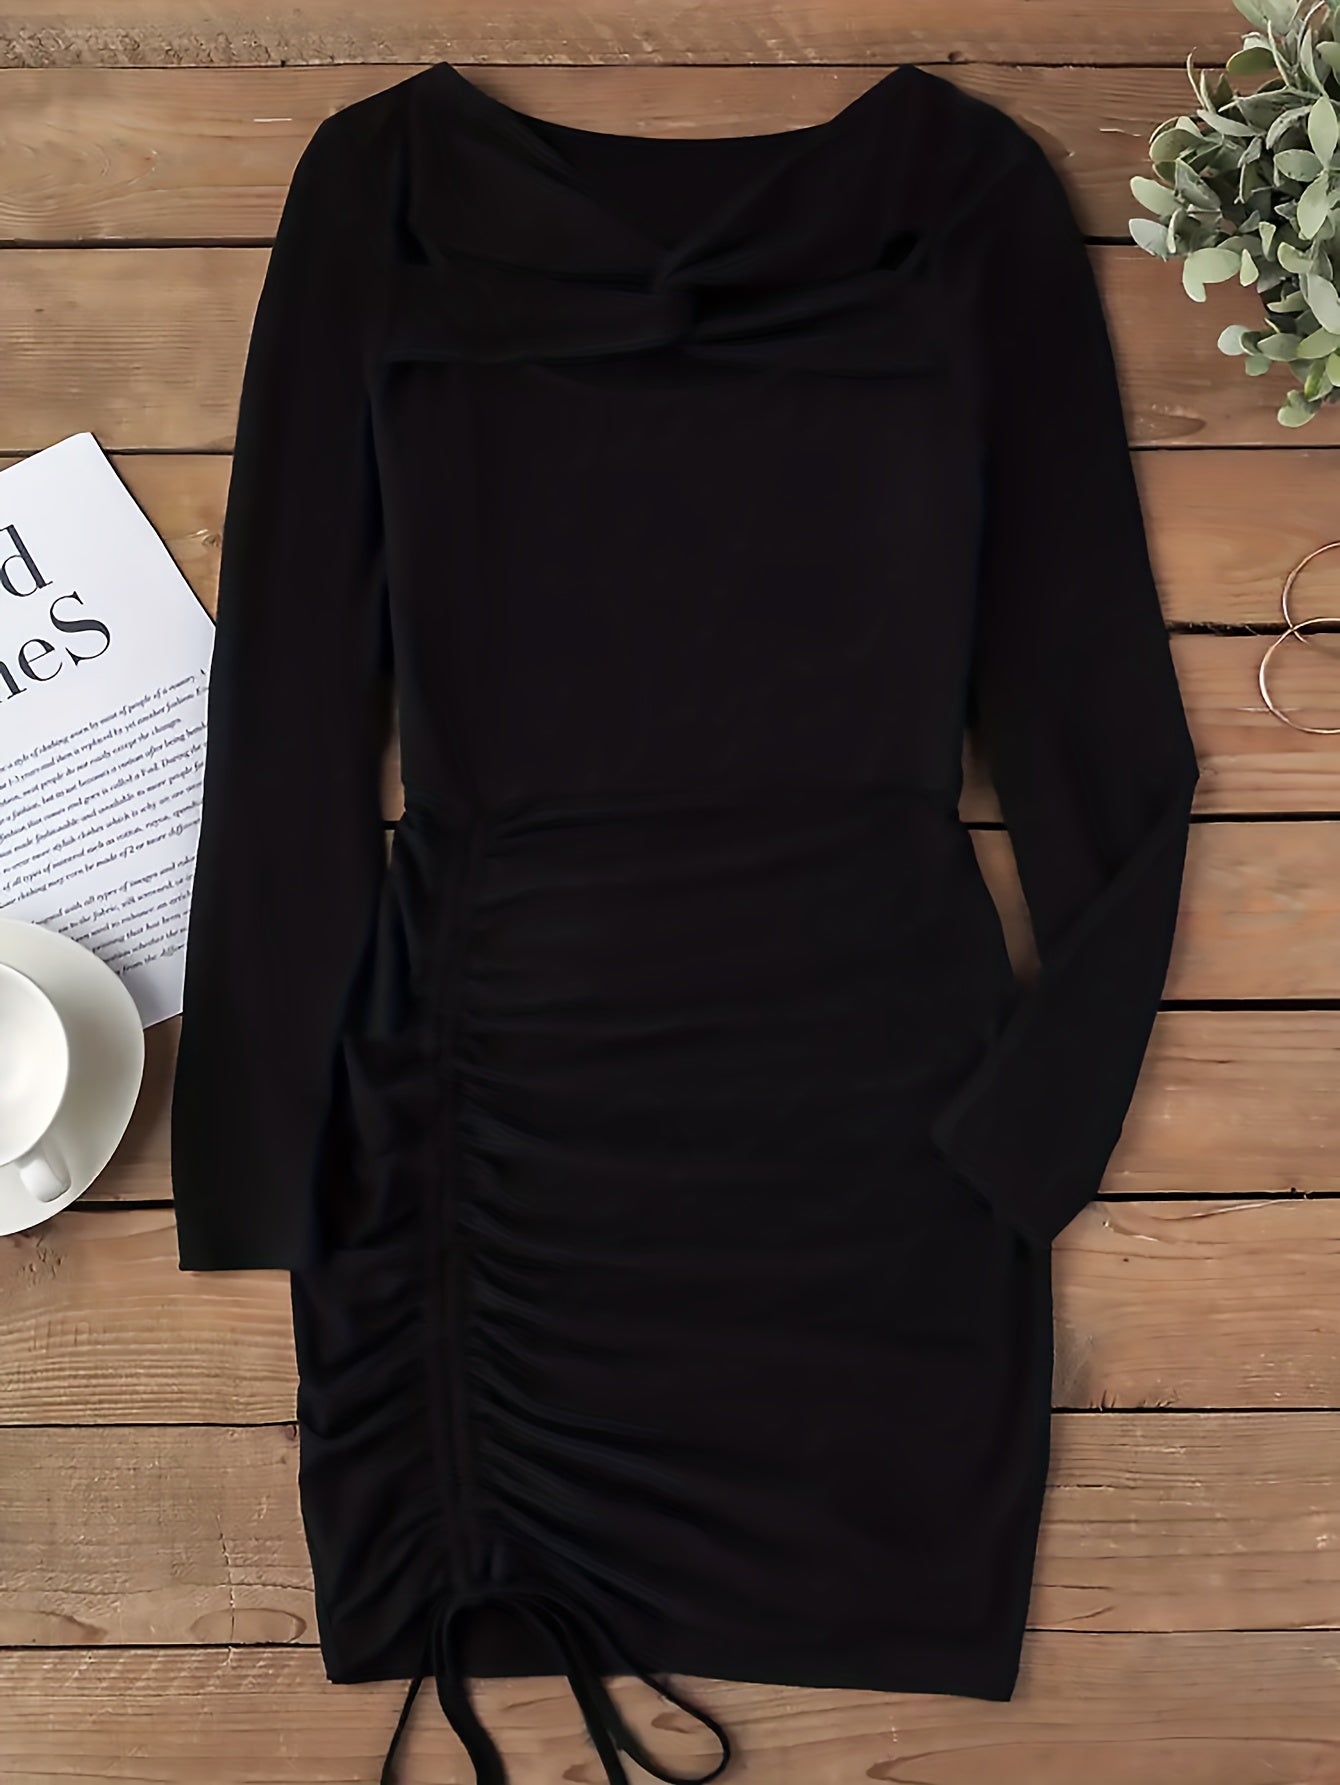 Antmvs Cut Out Drawstring Dress, Party Wear Long Sleeve Bodycon Solid Dress, Women's Clothing